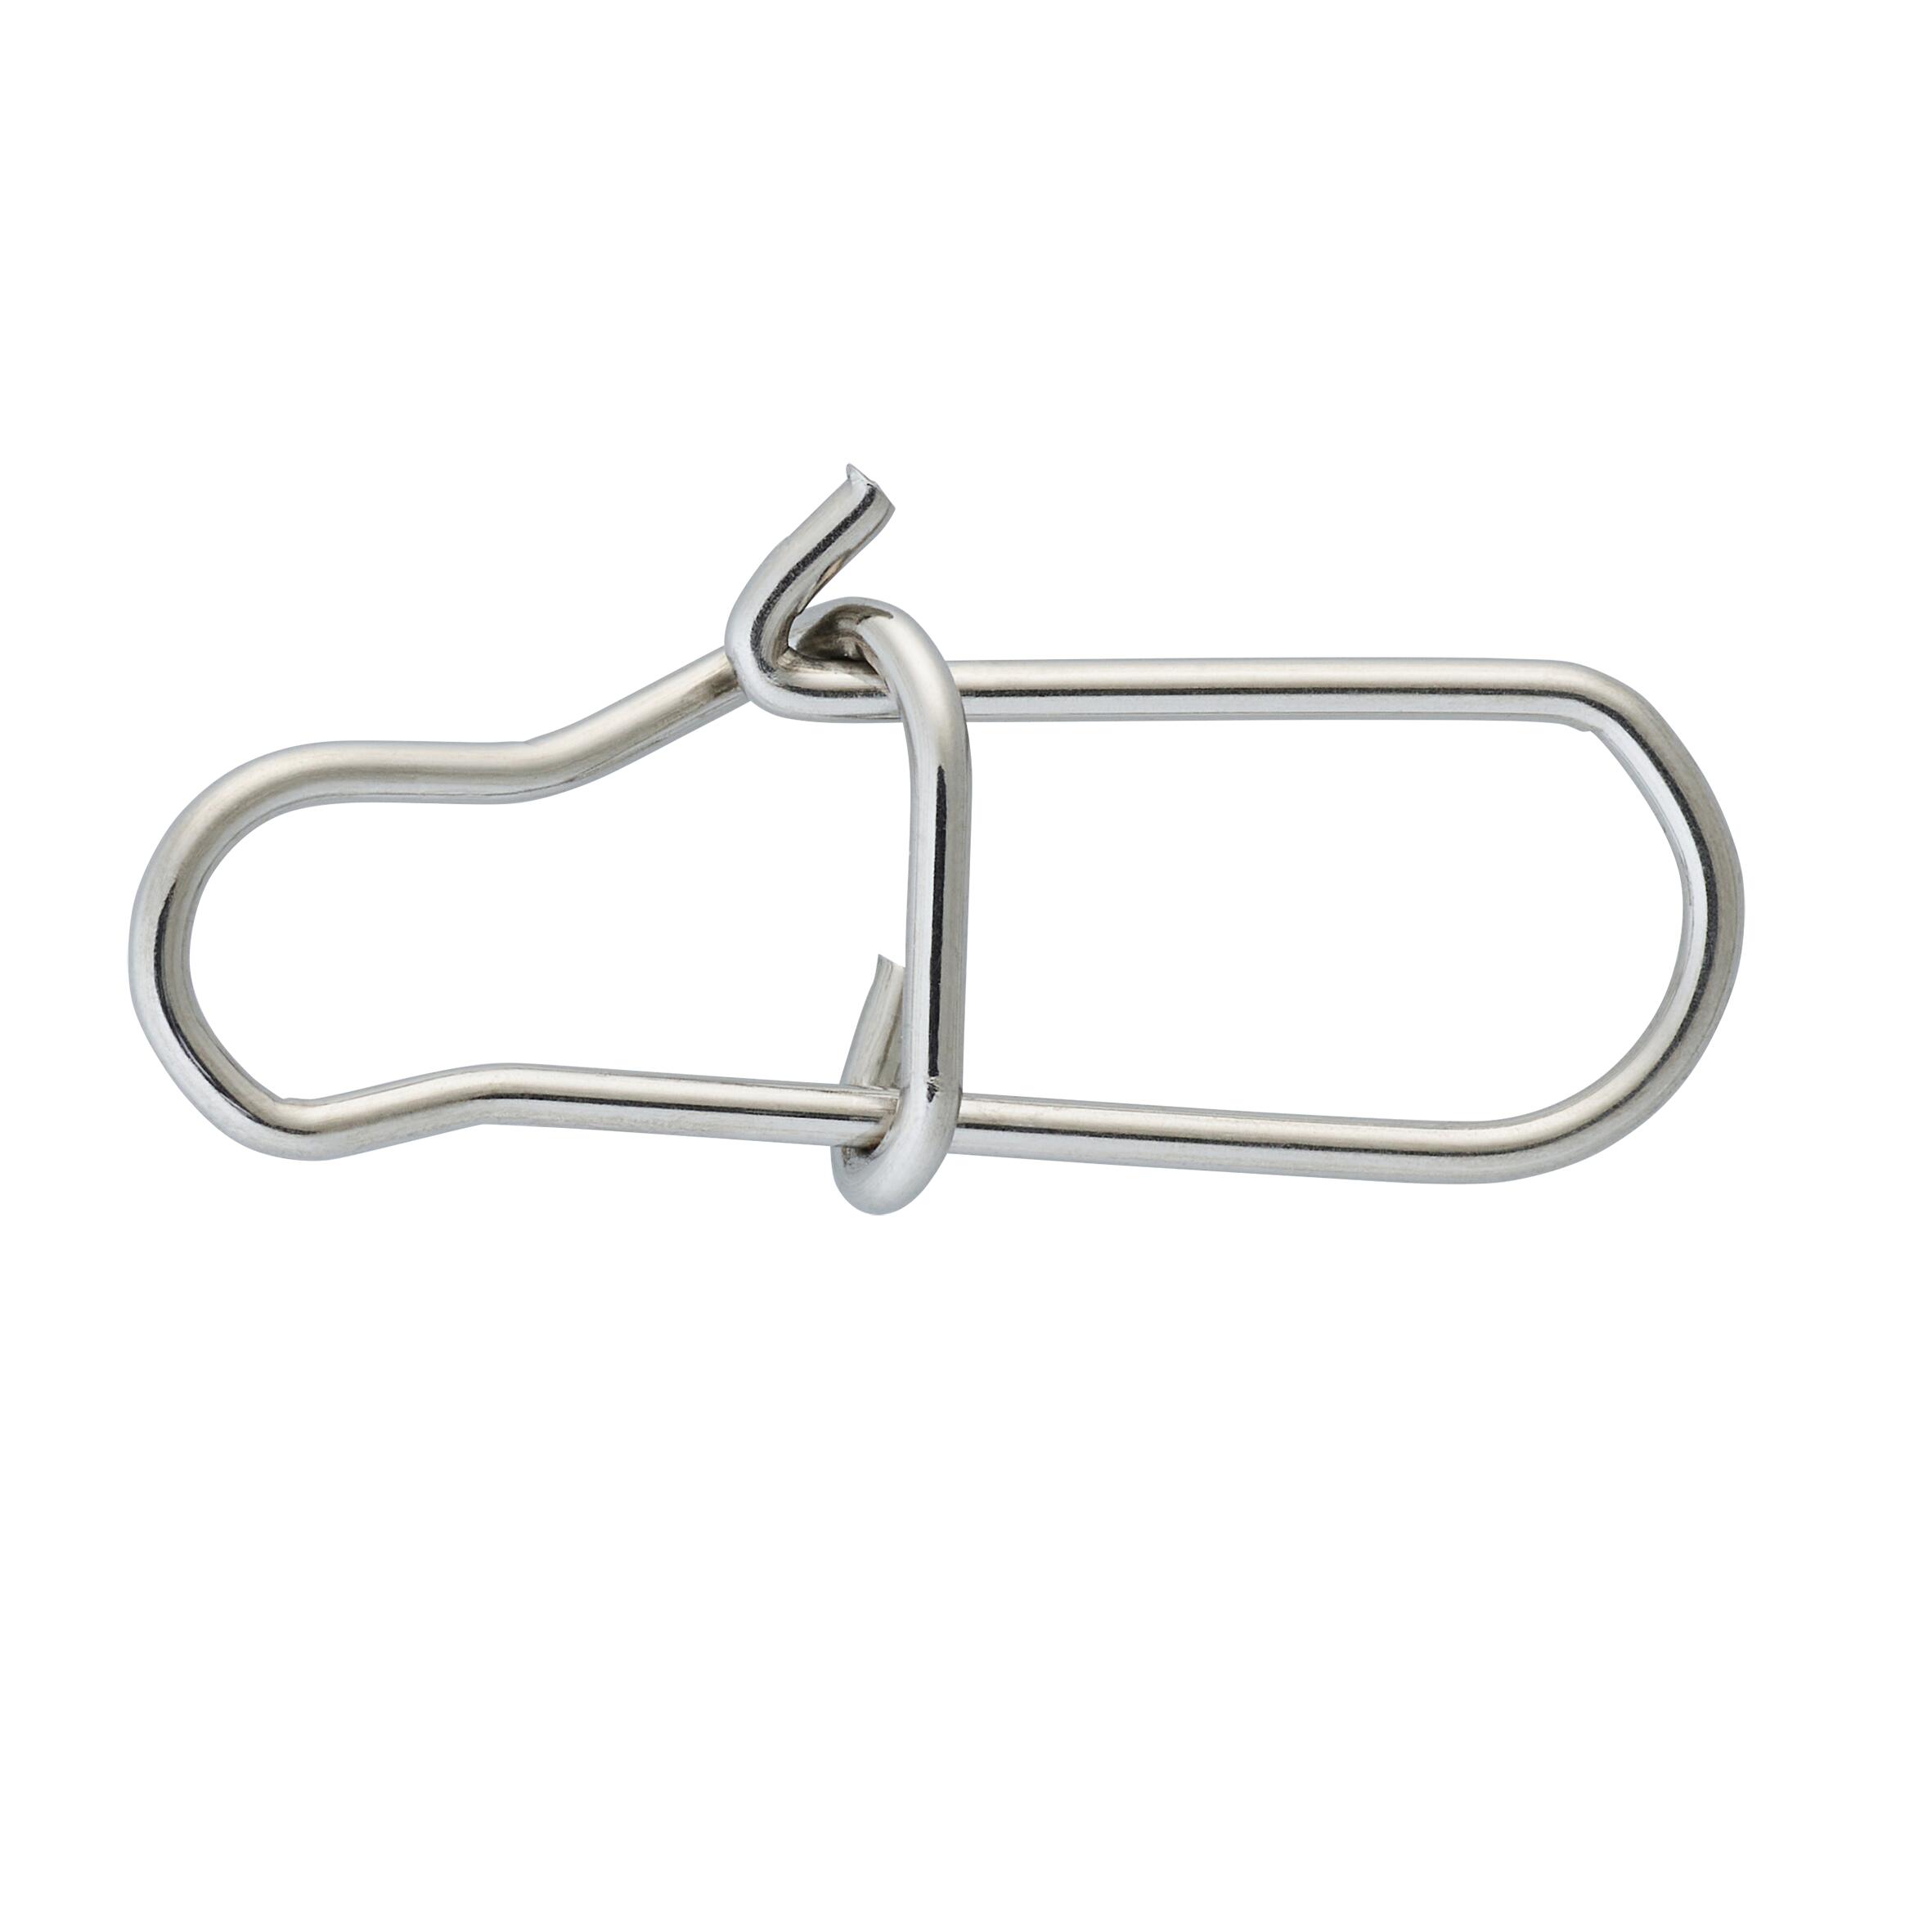 Fishing Stainless Steel Double Snap Clips x10 4/10